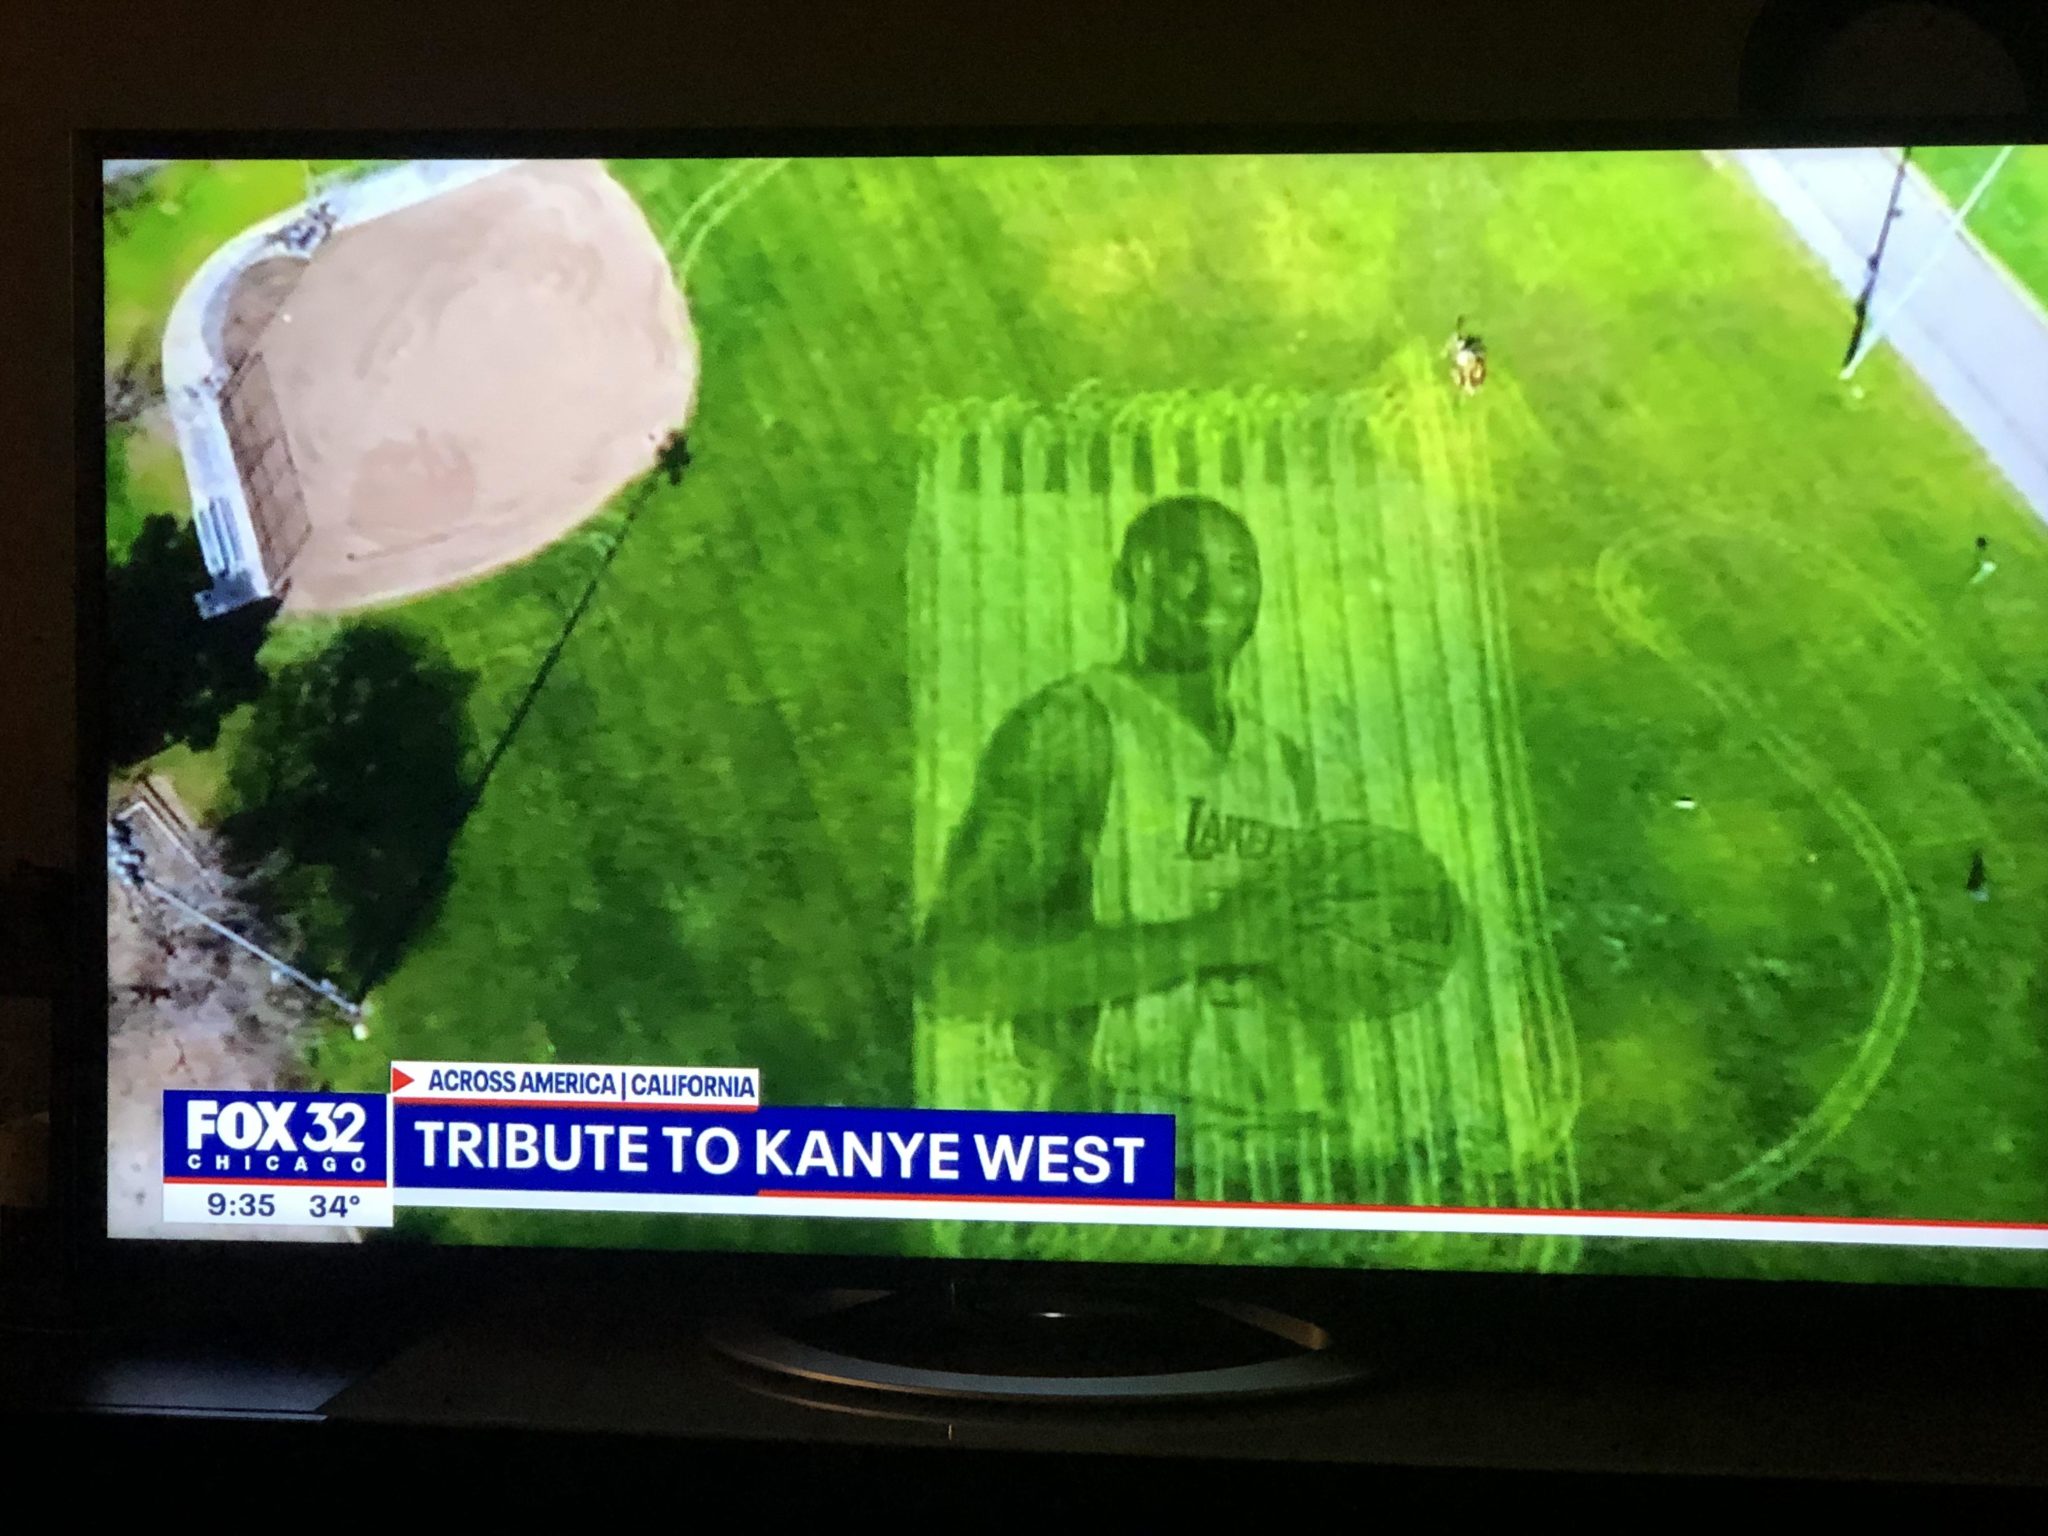 dumb people - tribute to kanye west - Across America California FOX32 Tribute To Kanye West Chicago 34